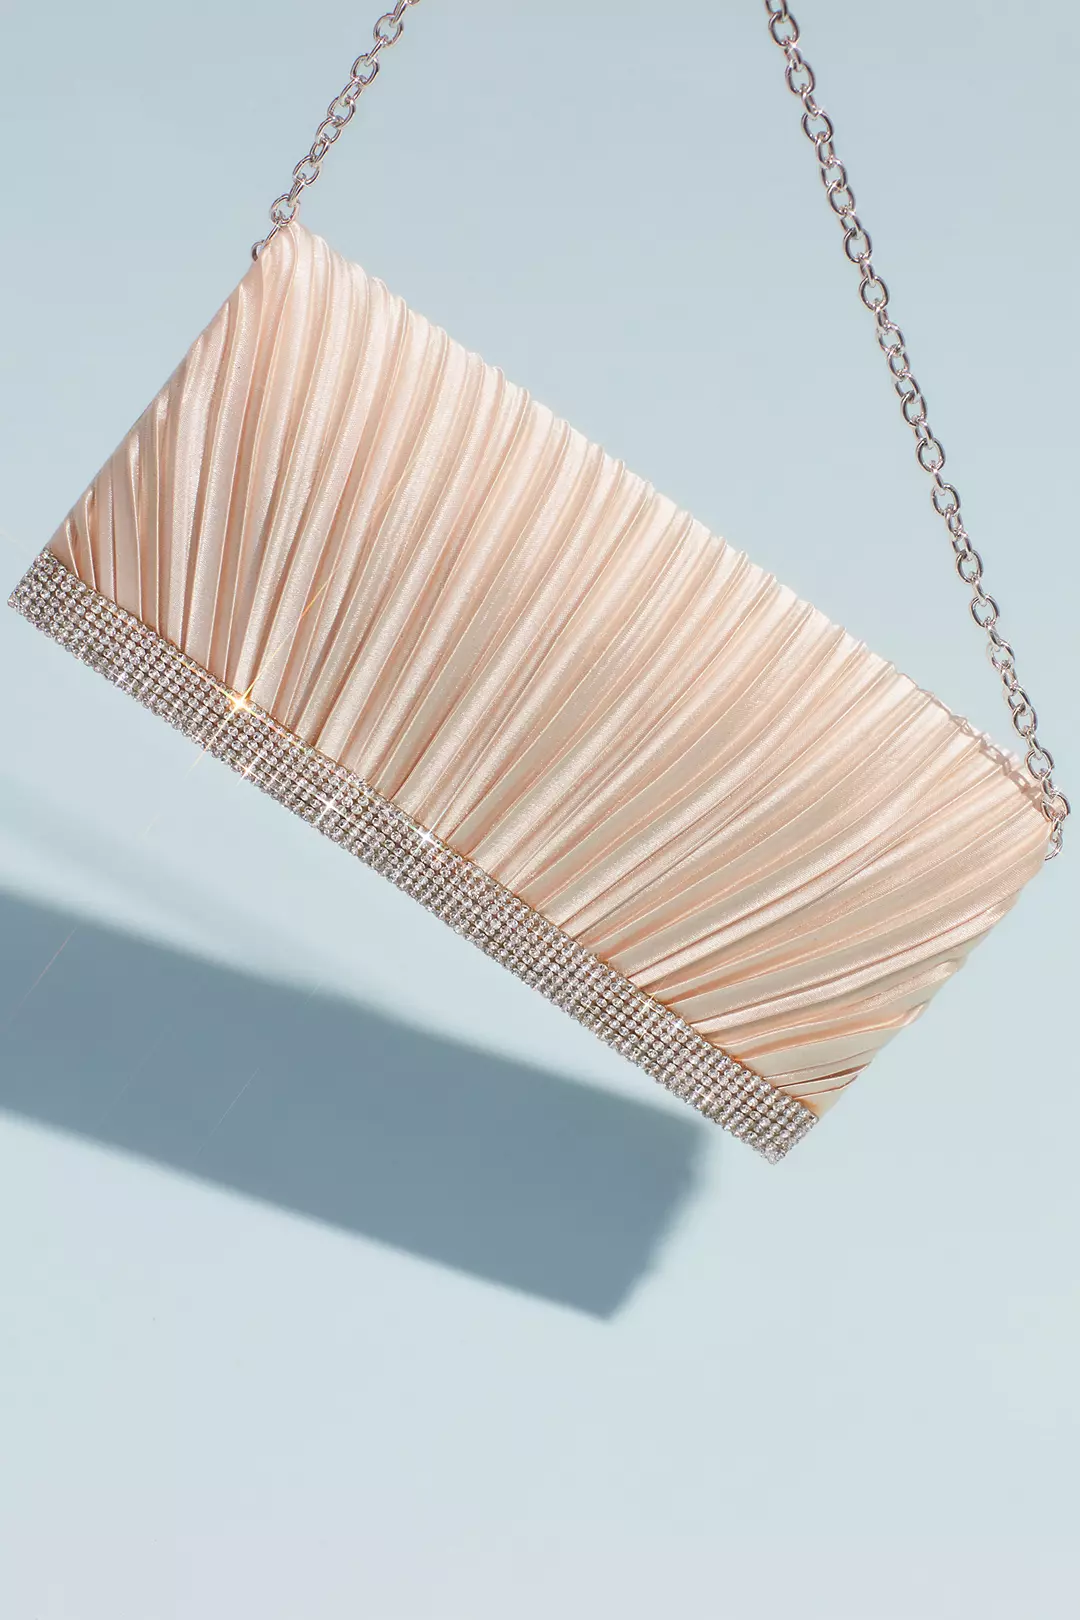 Pleated Fold Satin Baguette Bag with Crystal Trim Image 3